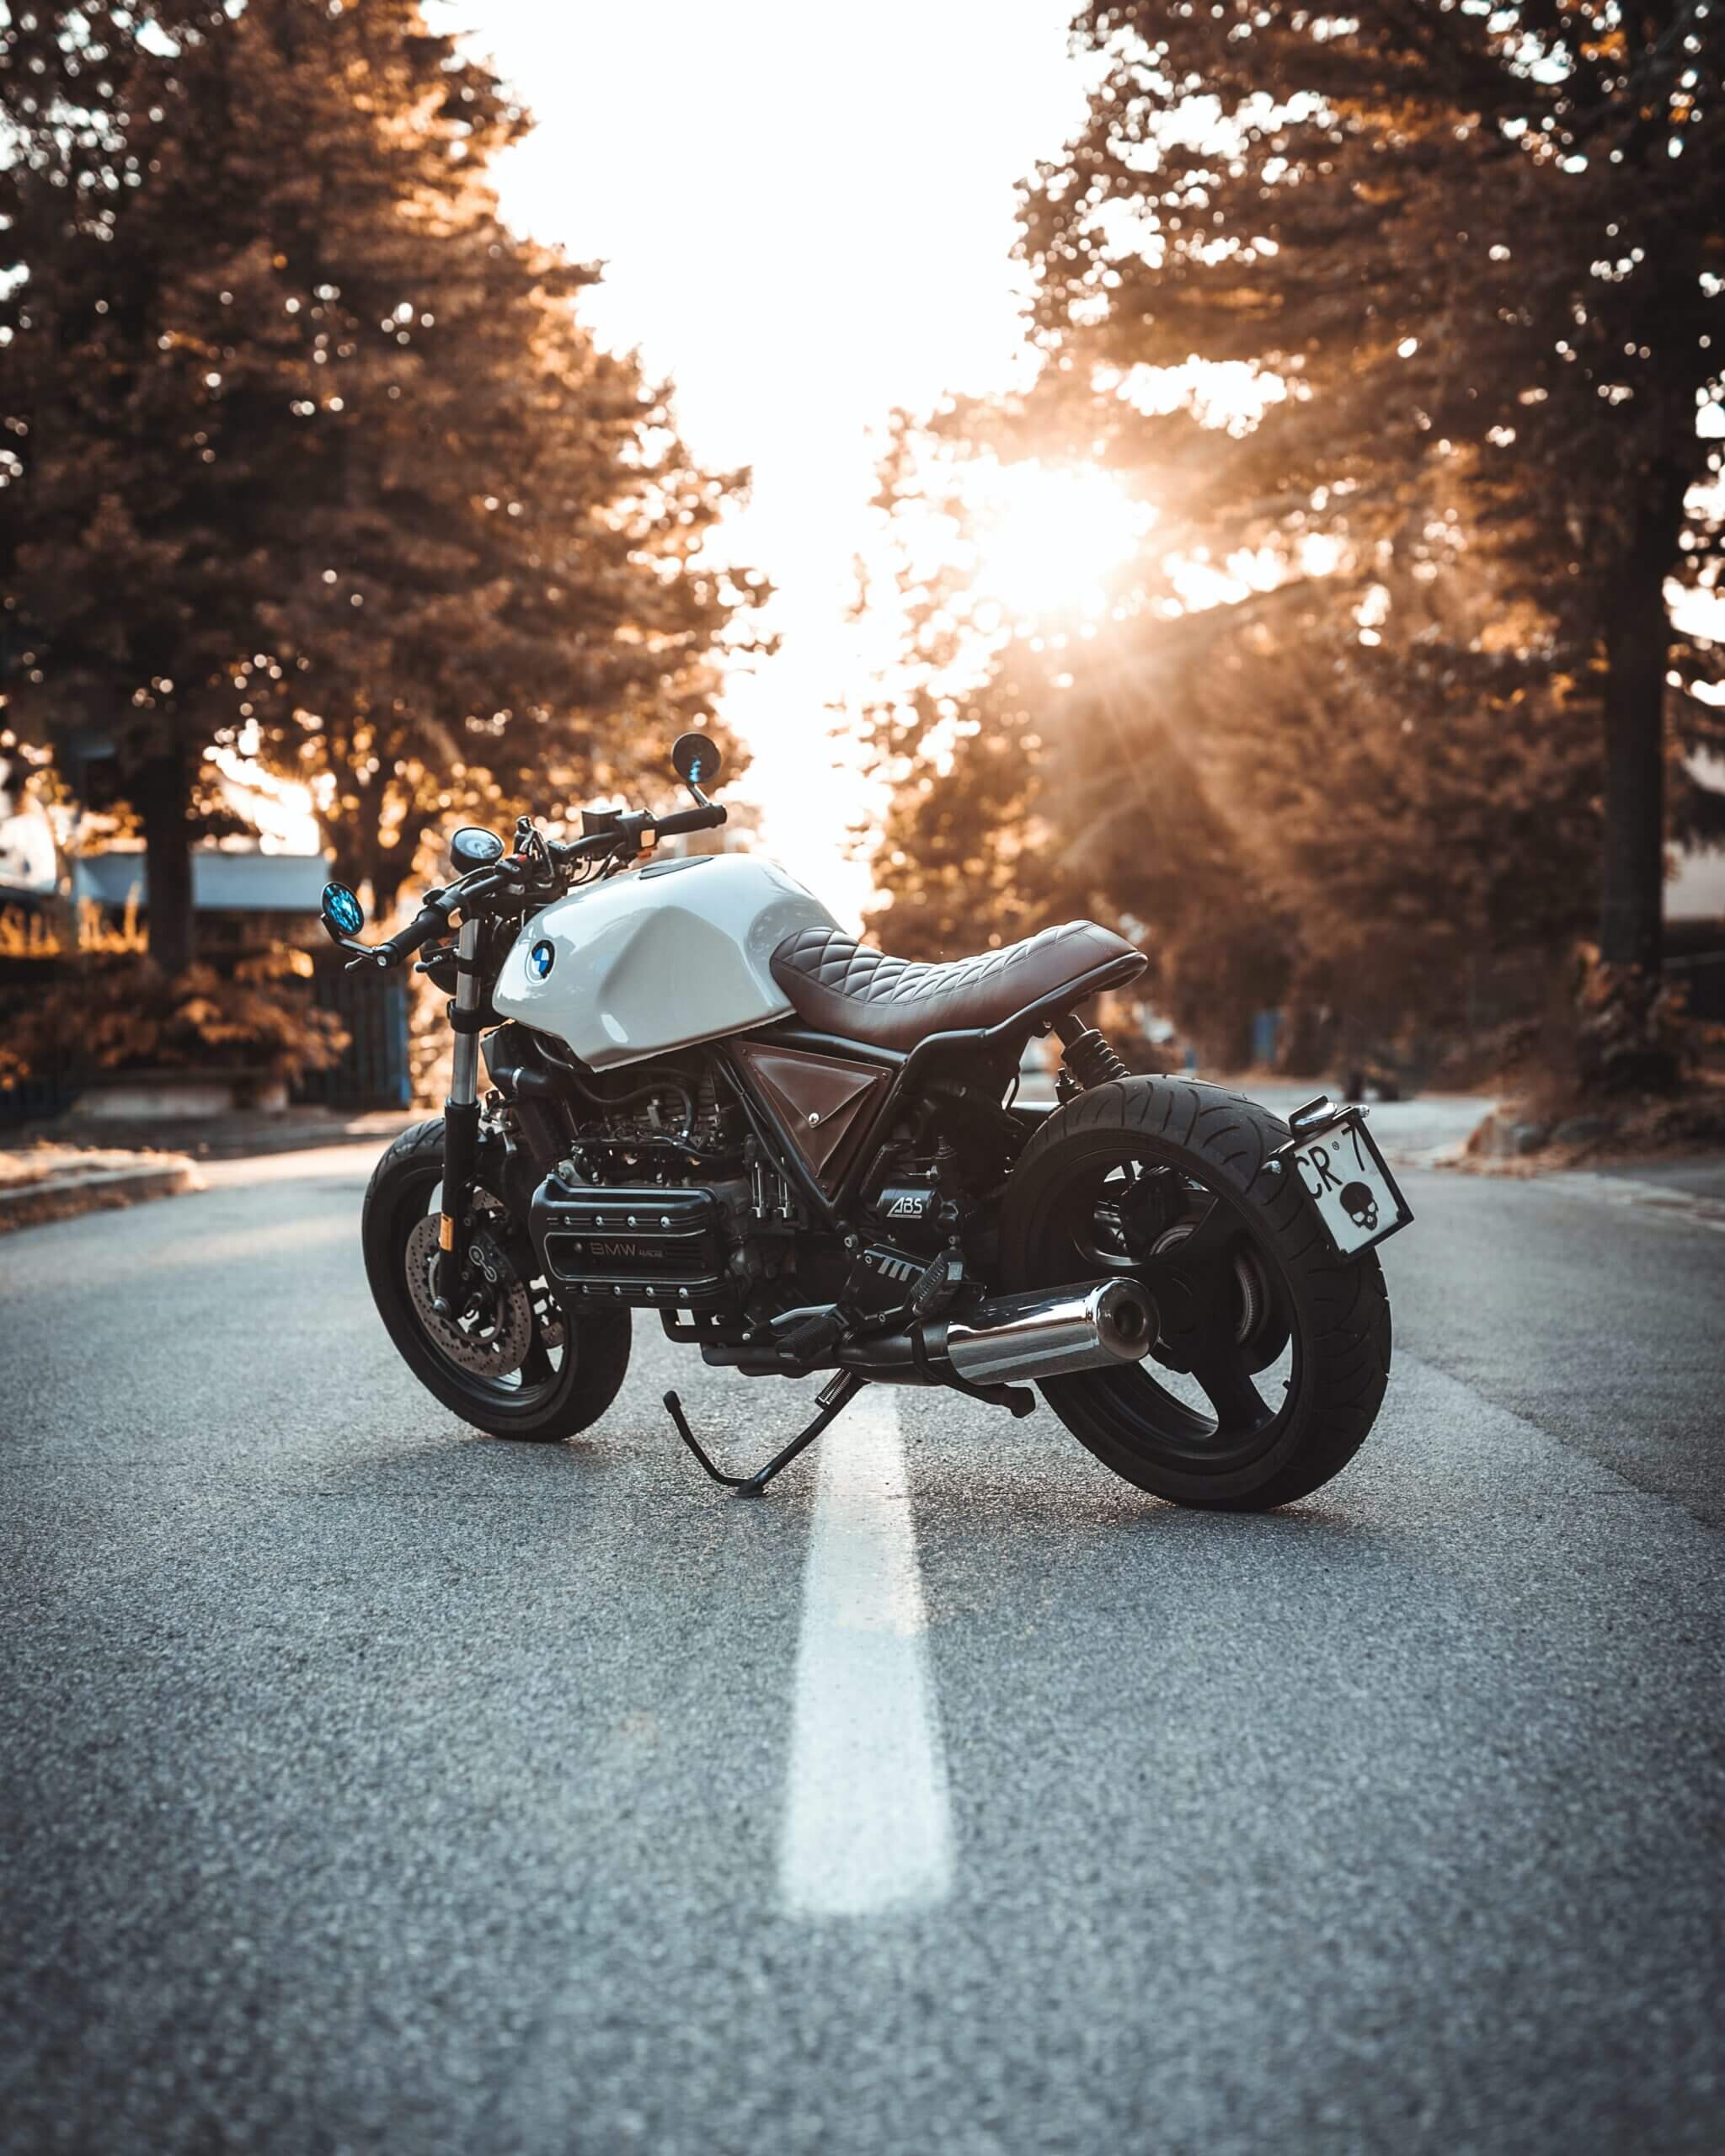 Annapolis Motorcycle Accident Lawyer